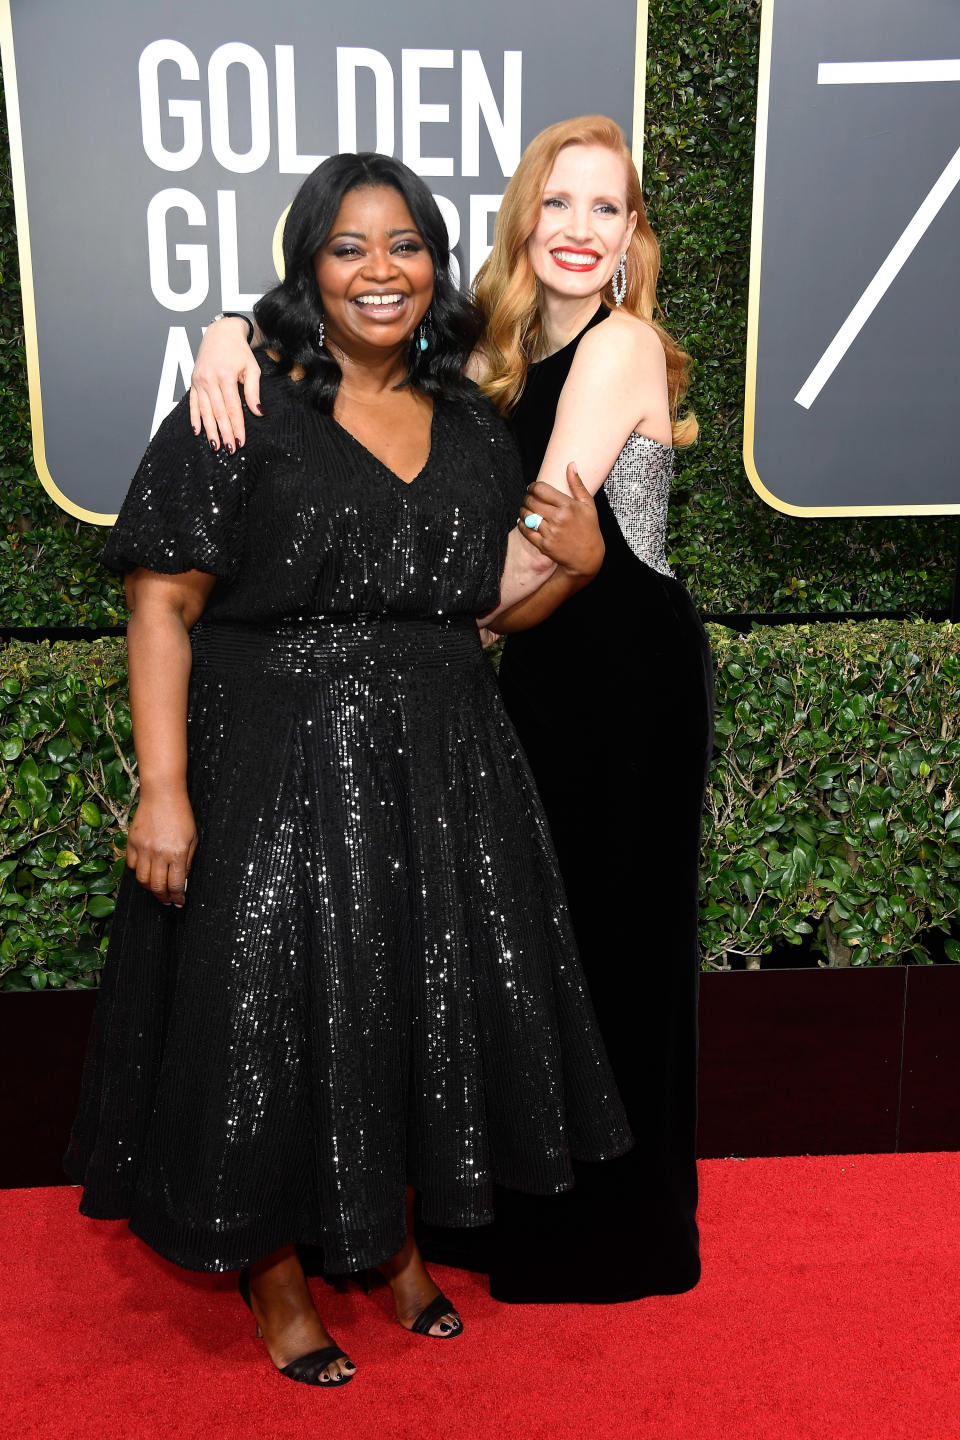 jessica and octavia hugging on the red carpet